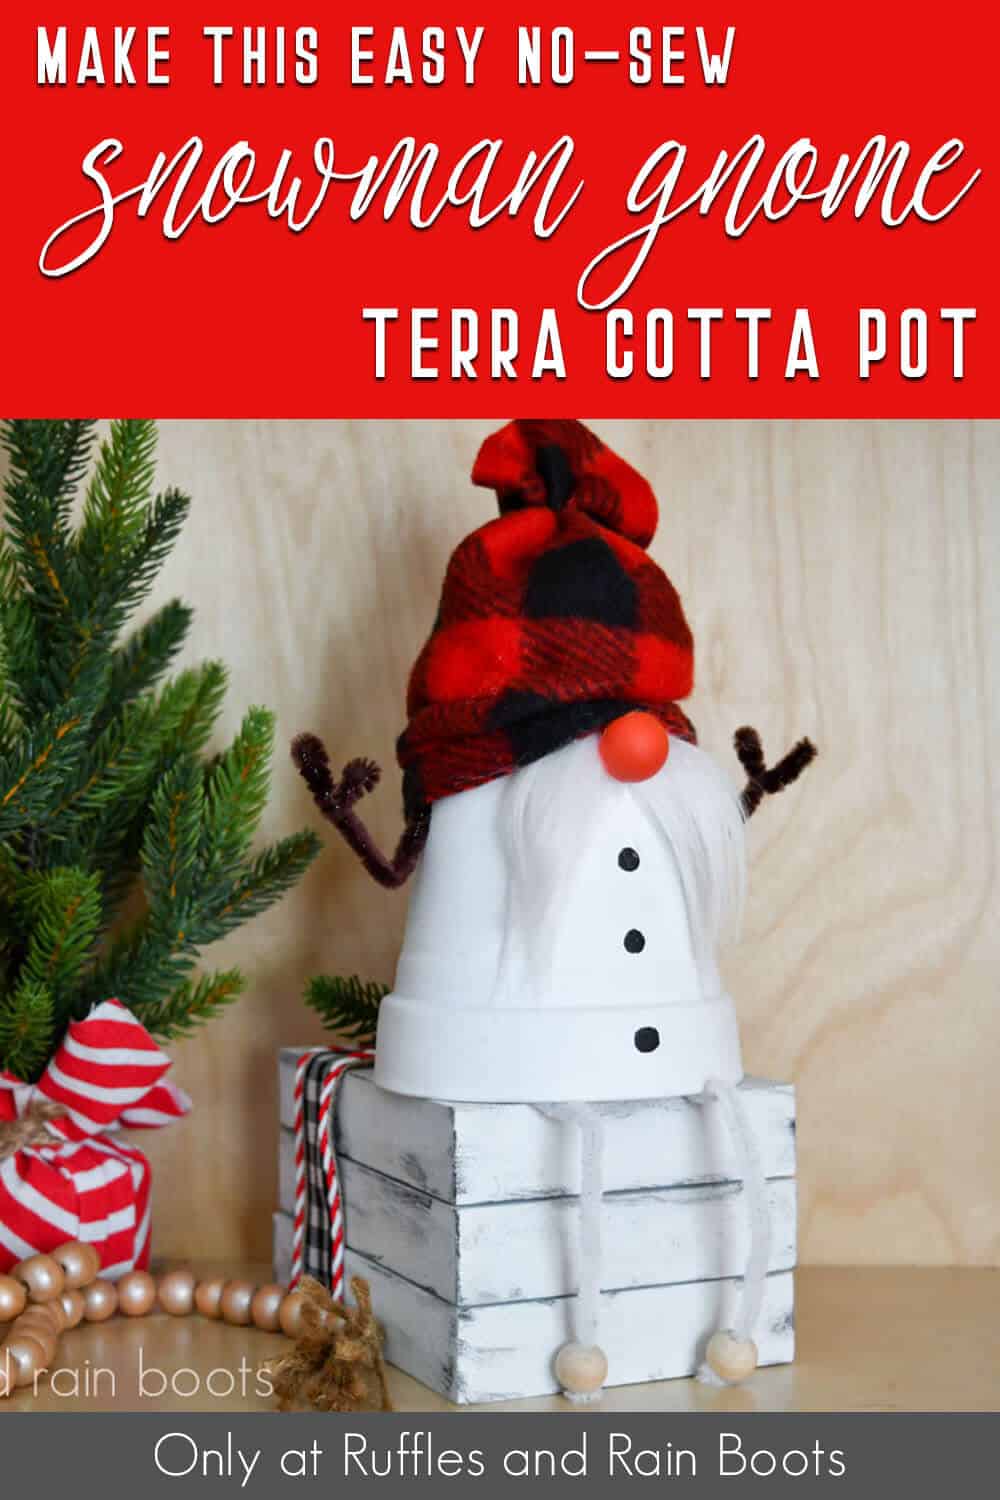 clay pot gnome snowman with text which reads make this easy no-sew snowman gnome terra cotta pot